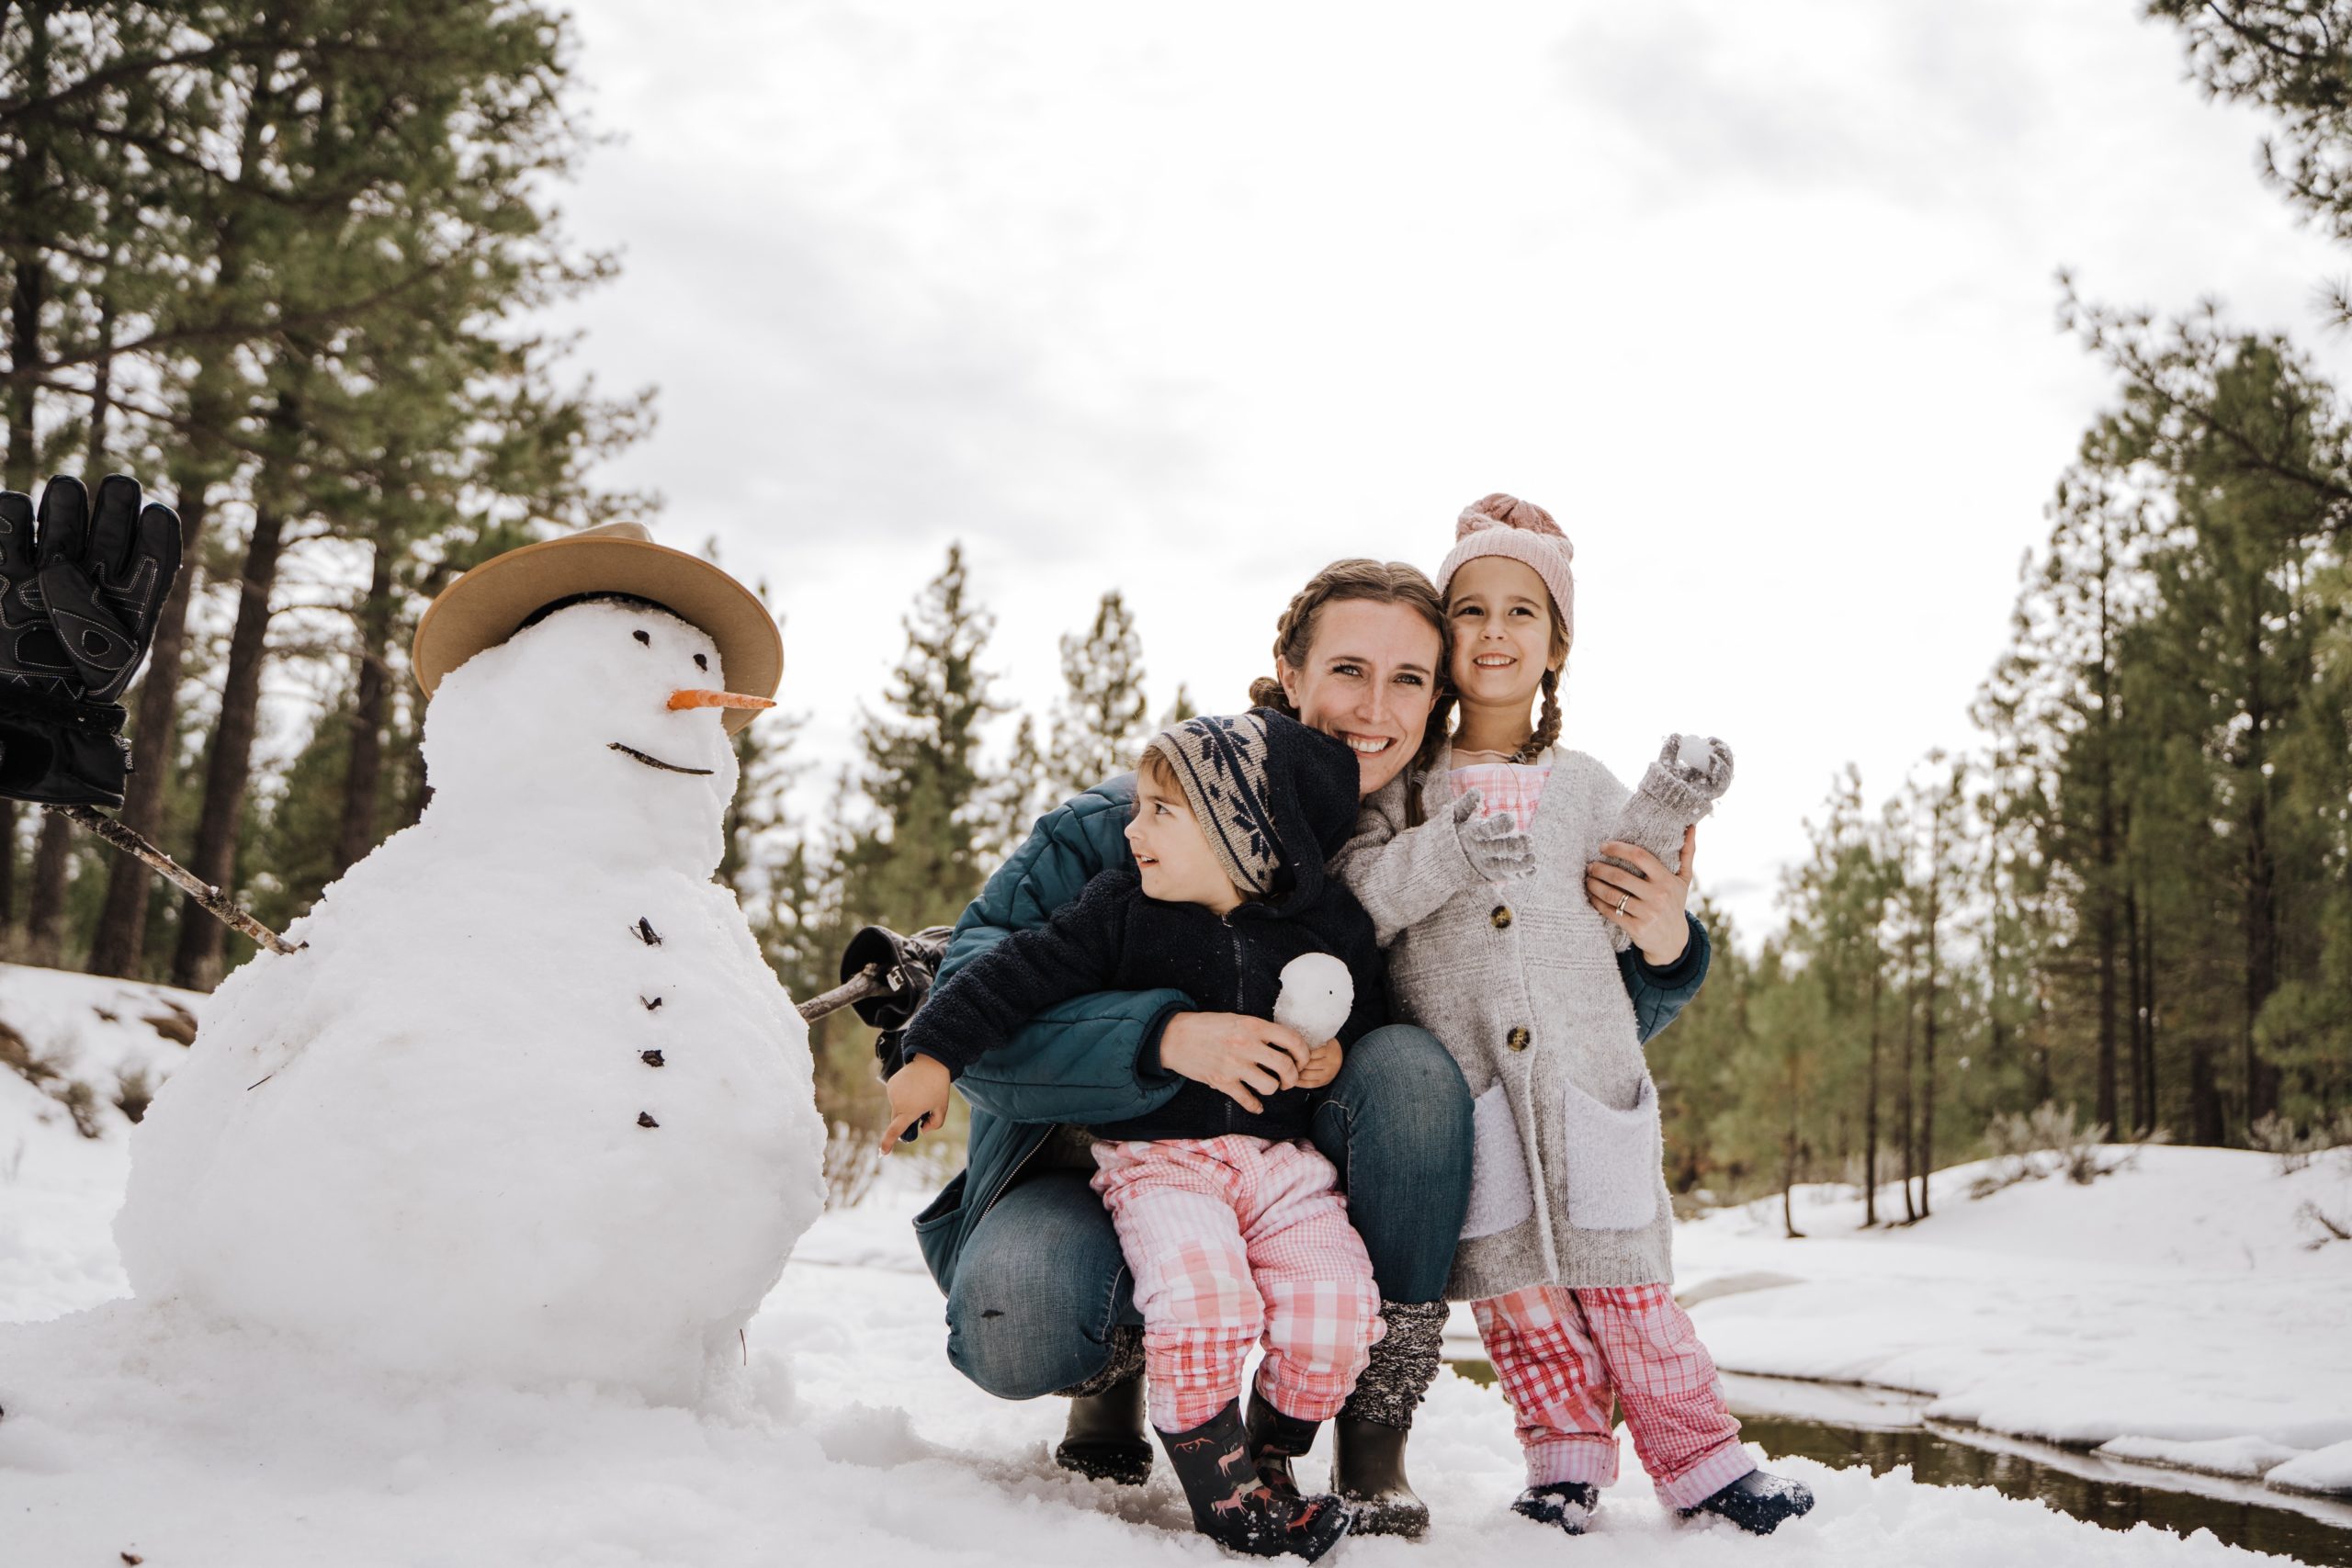 Winter Gear for Less: Outfitting Your Family in Colder Weather